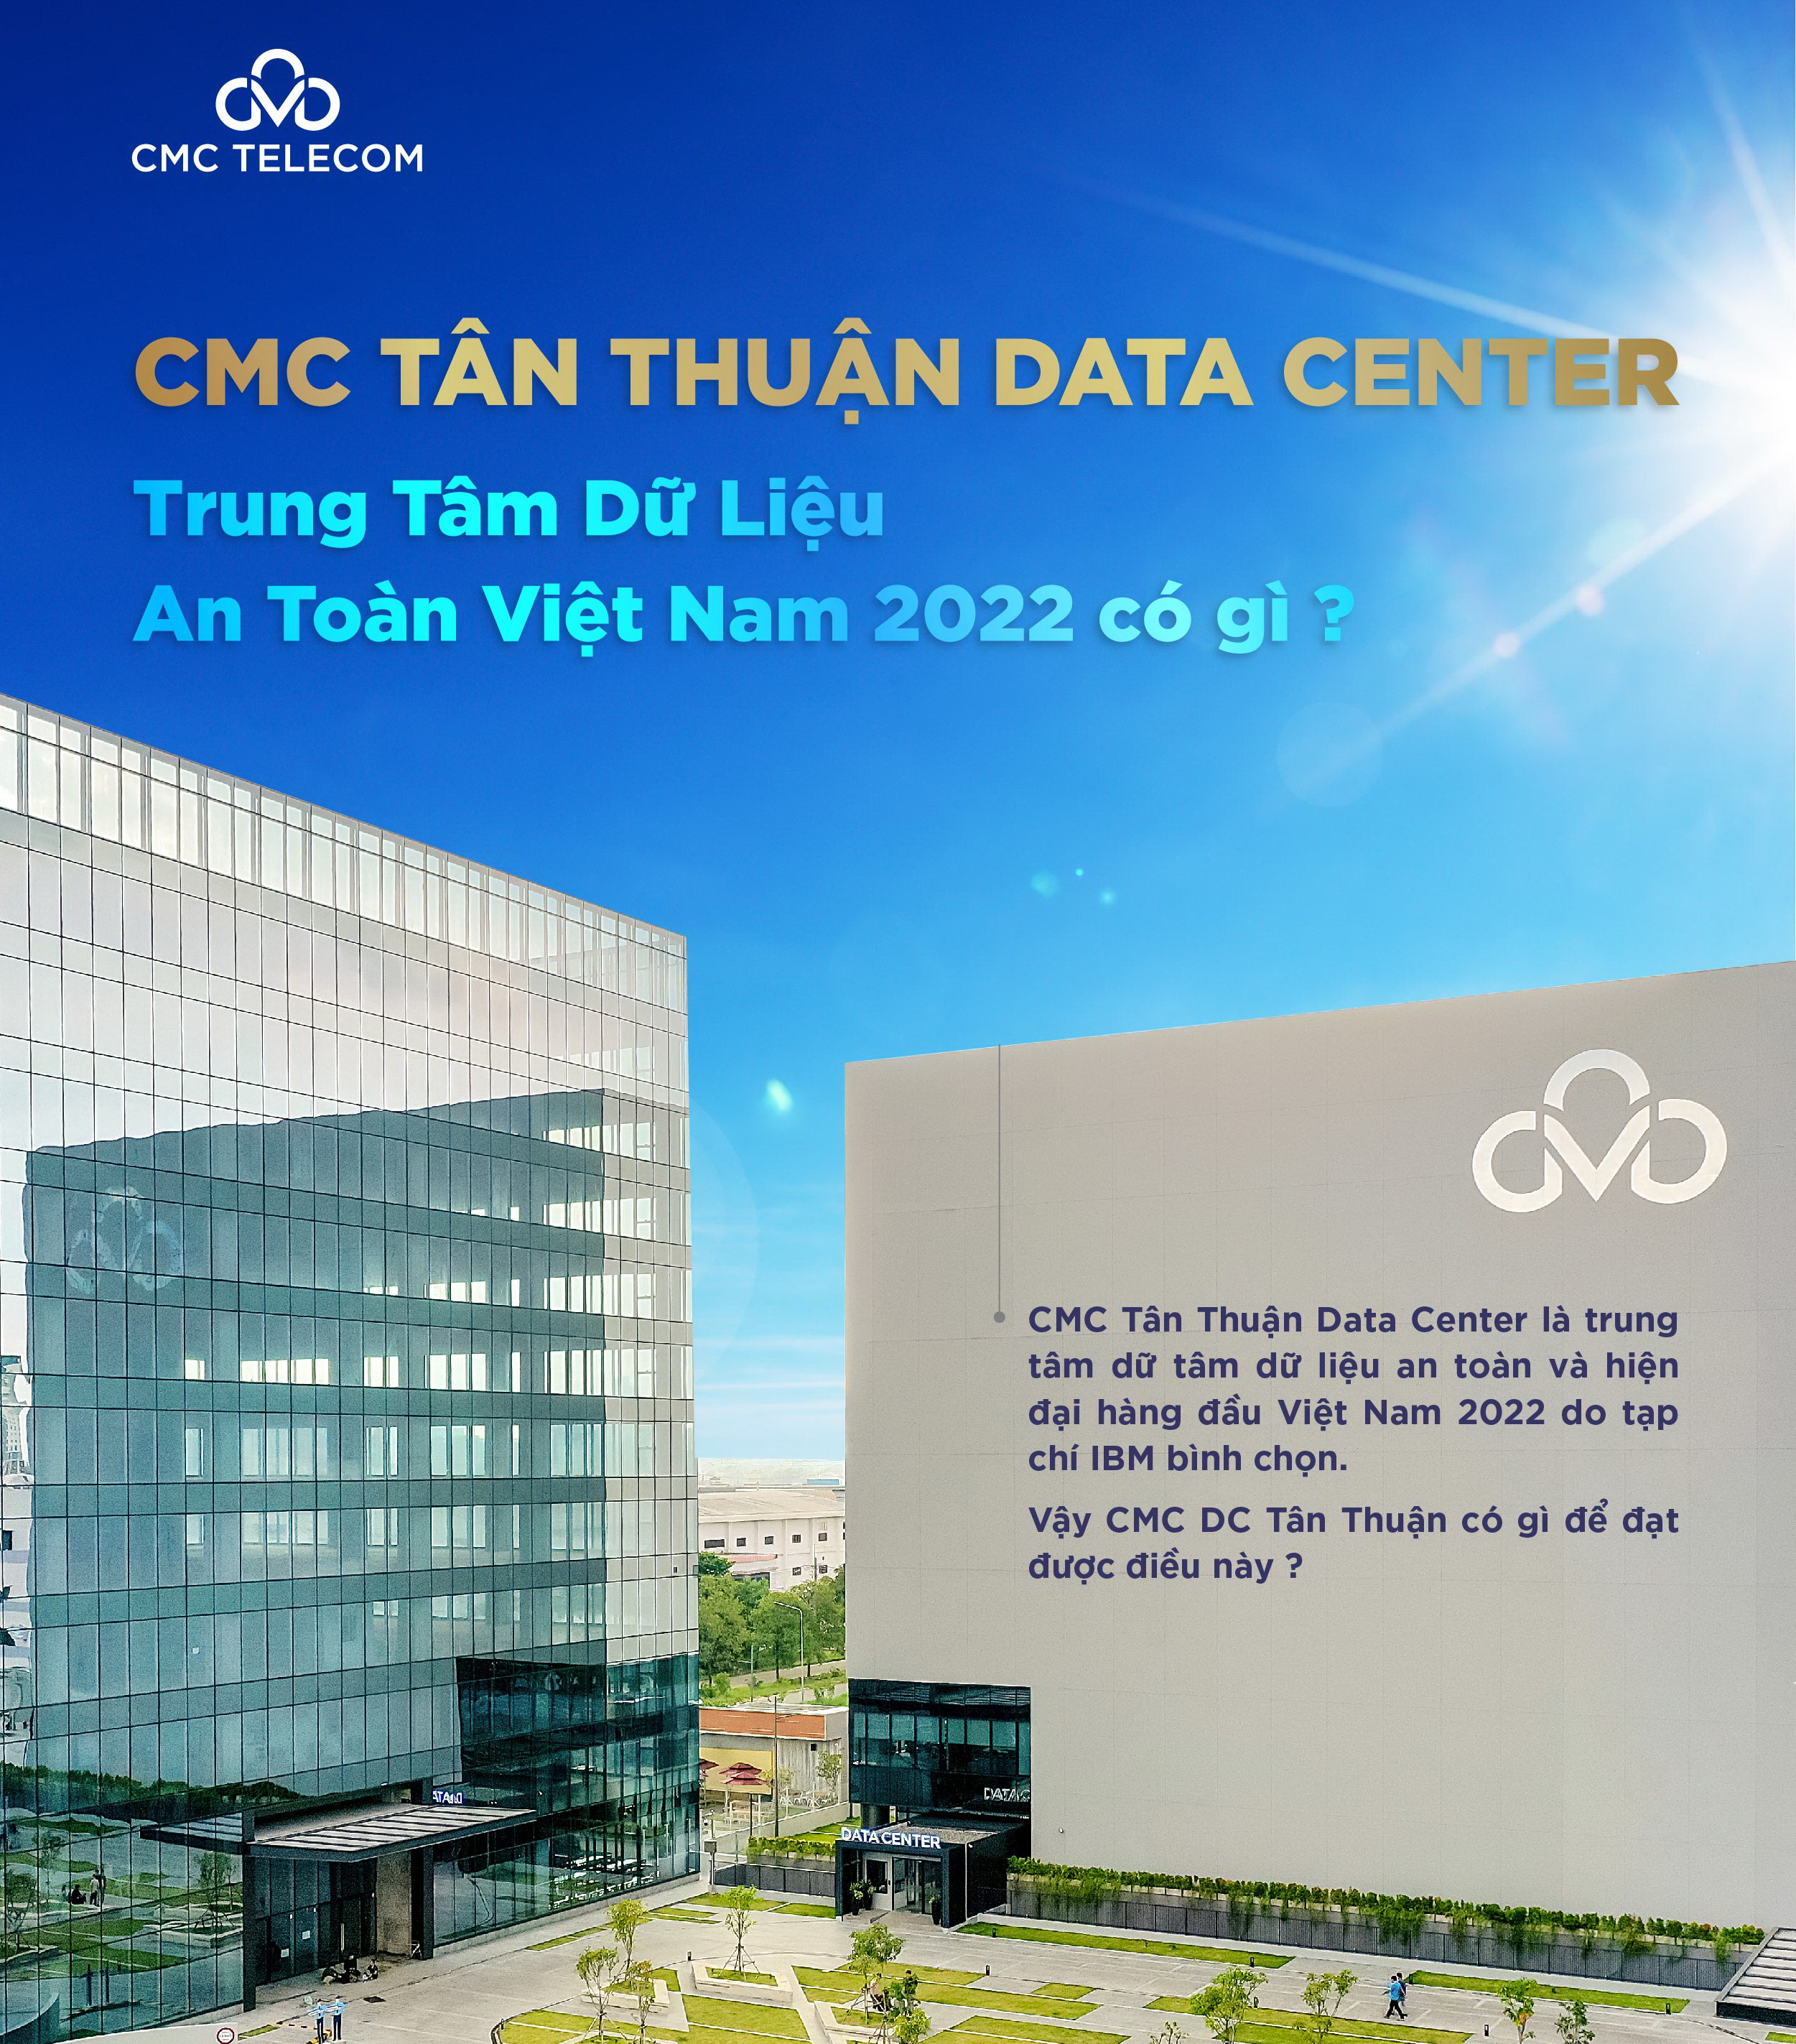 CMC Tan Thuan Data Center is the best secure and modern data center in Vietnam 2022 as voted by IBM.  So what does this data cen